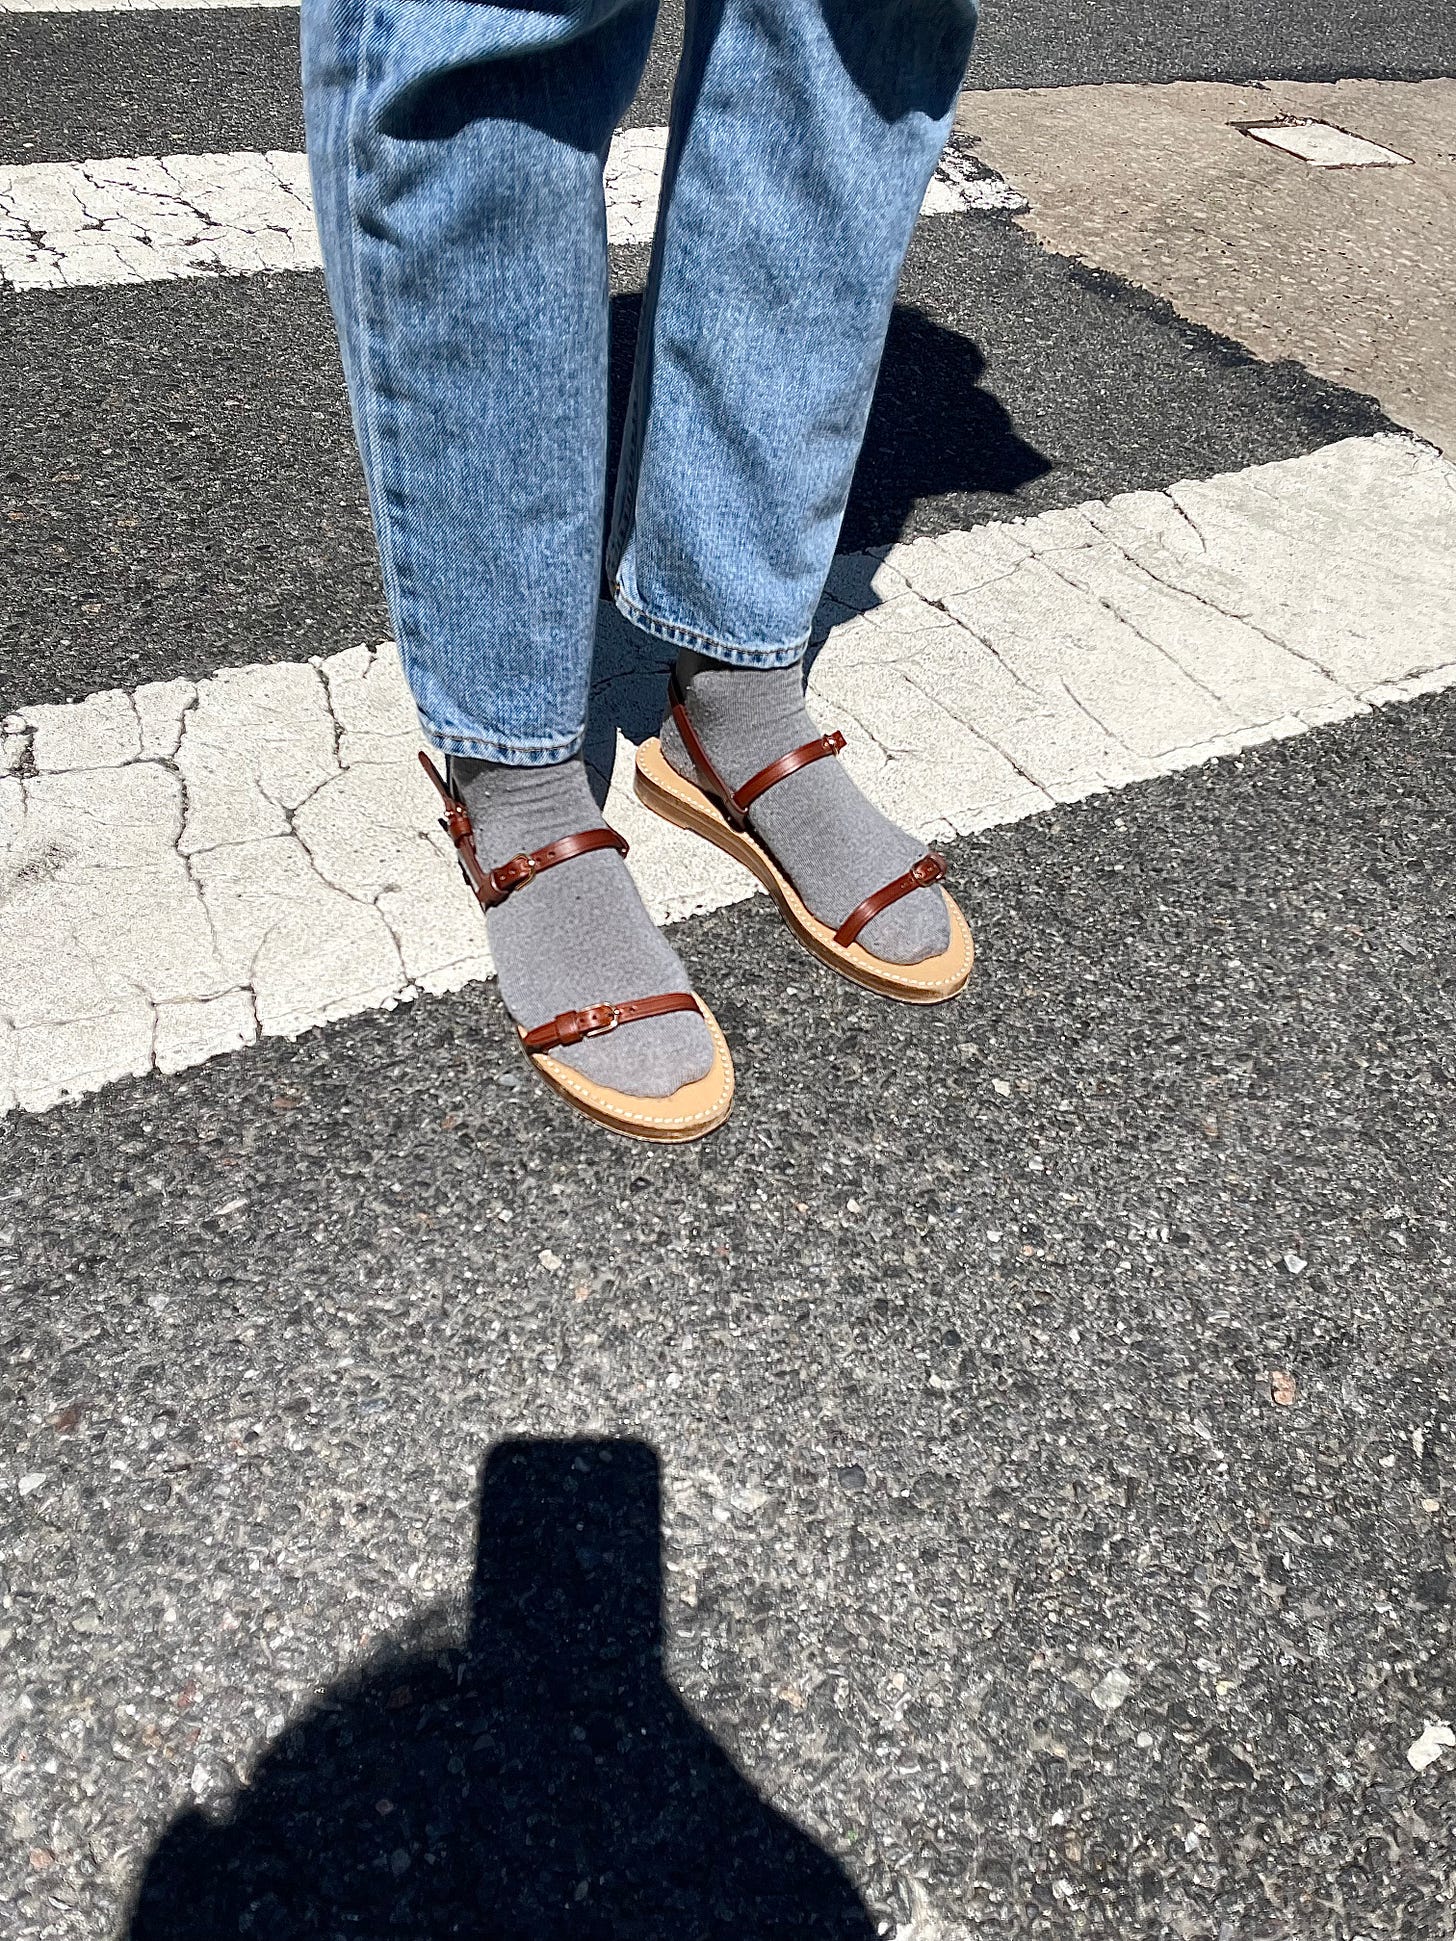 Before it's too warm: socks, sandals and how to wear them